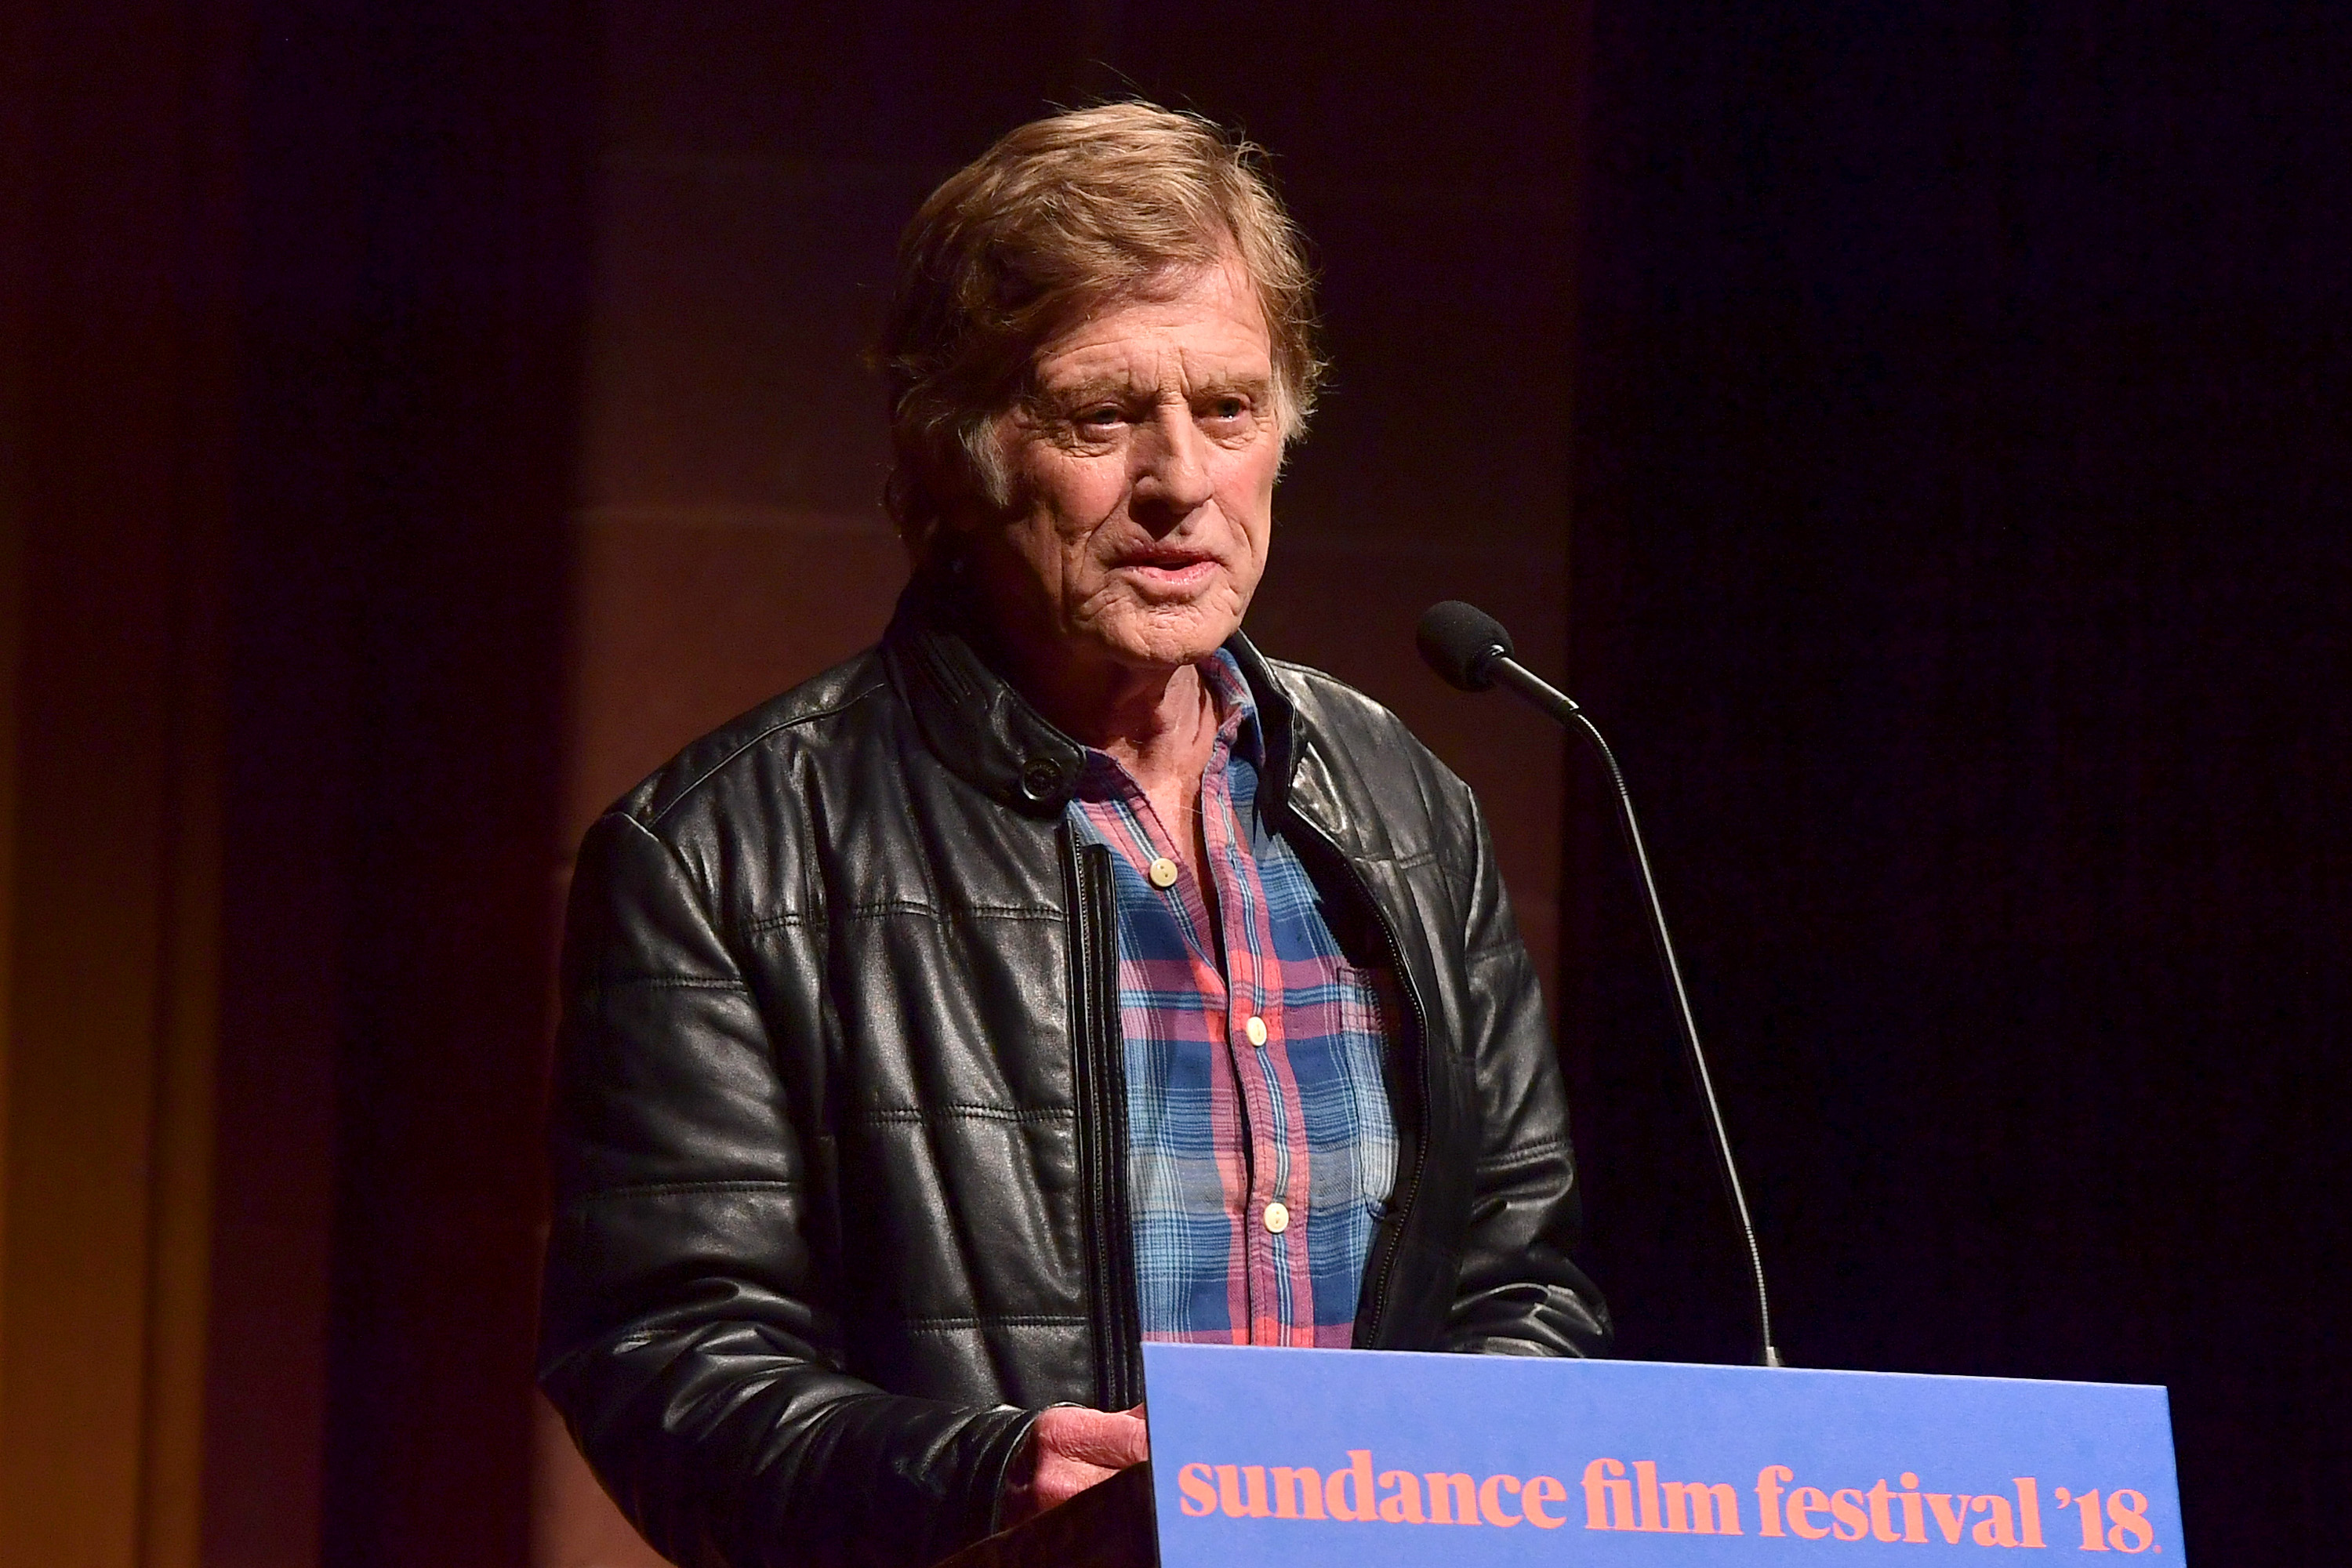 Robert Redford Getty Images